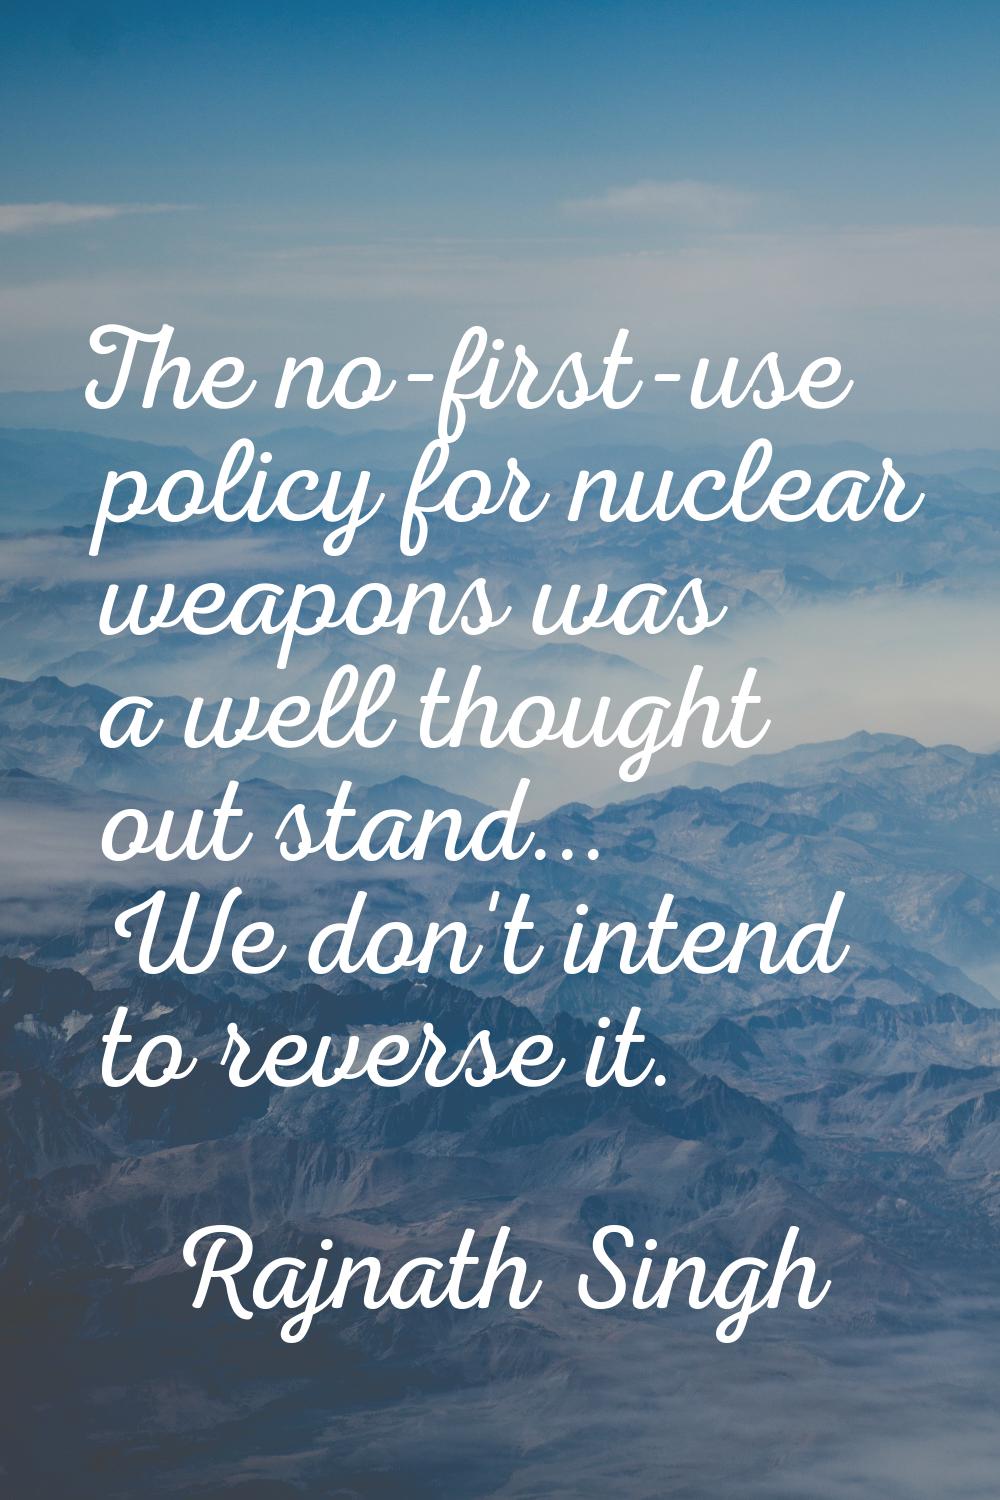 The no-first-use policy for nuclear weapons was a well thought out stand... We don't intend to reve